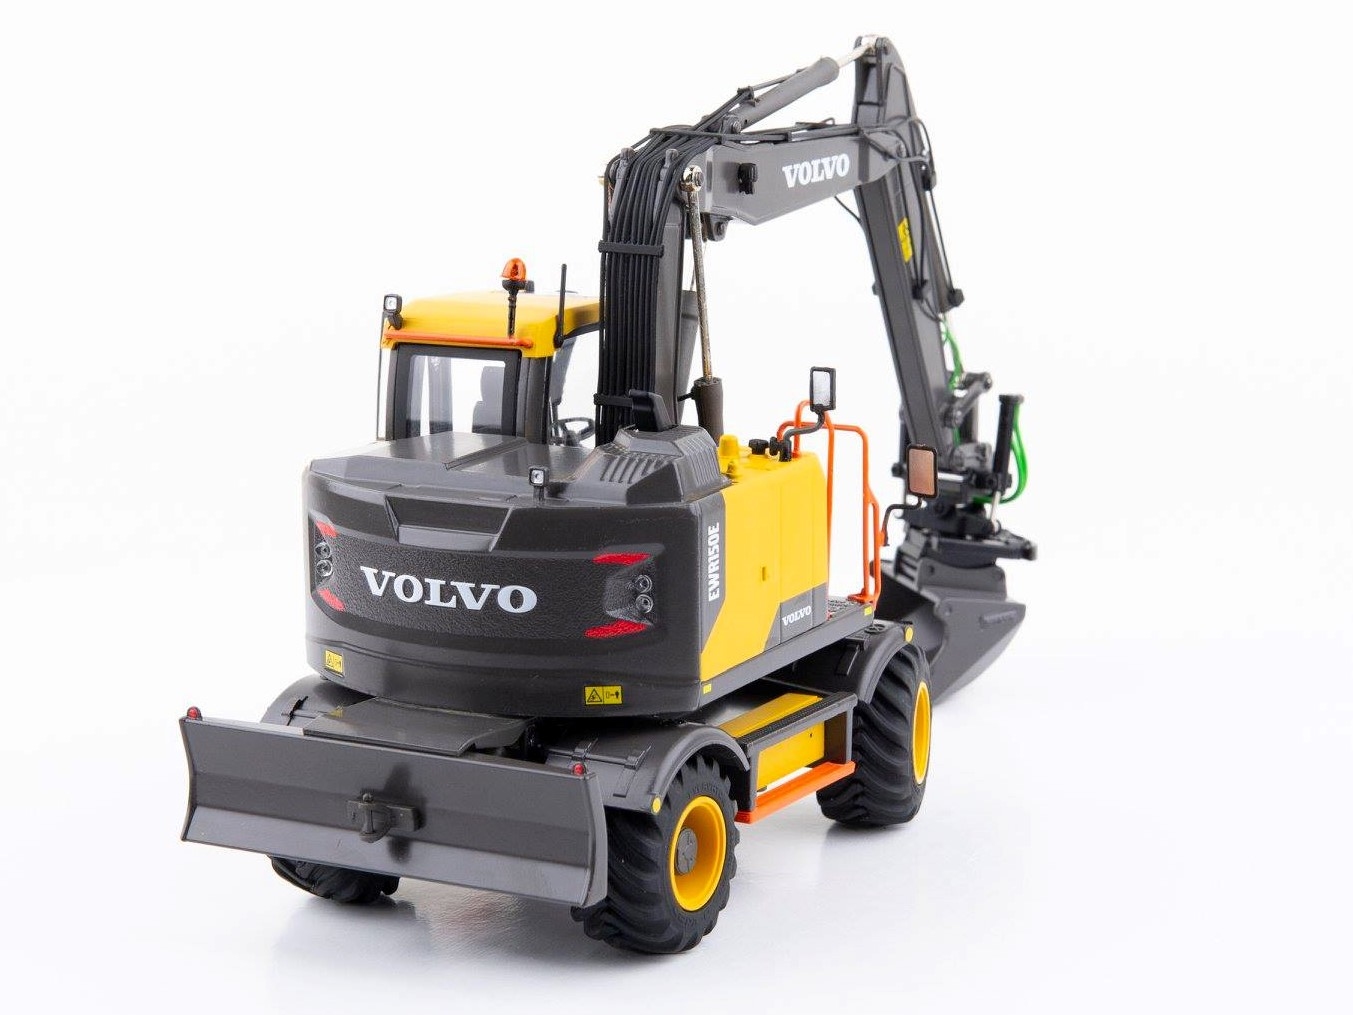 AT-Collections 2018 - Volvo EWR150E - Wheeled Excavator